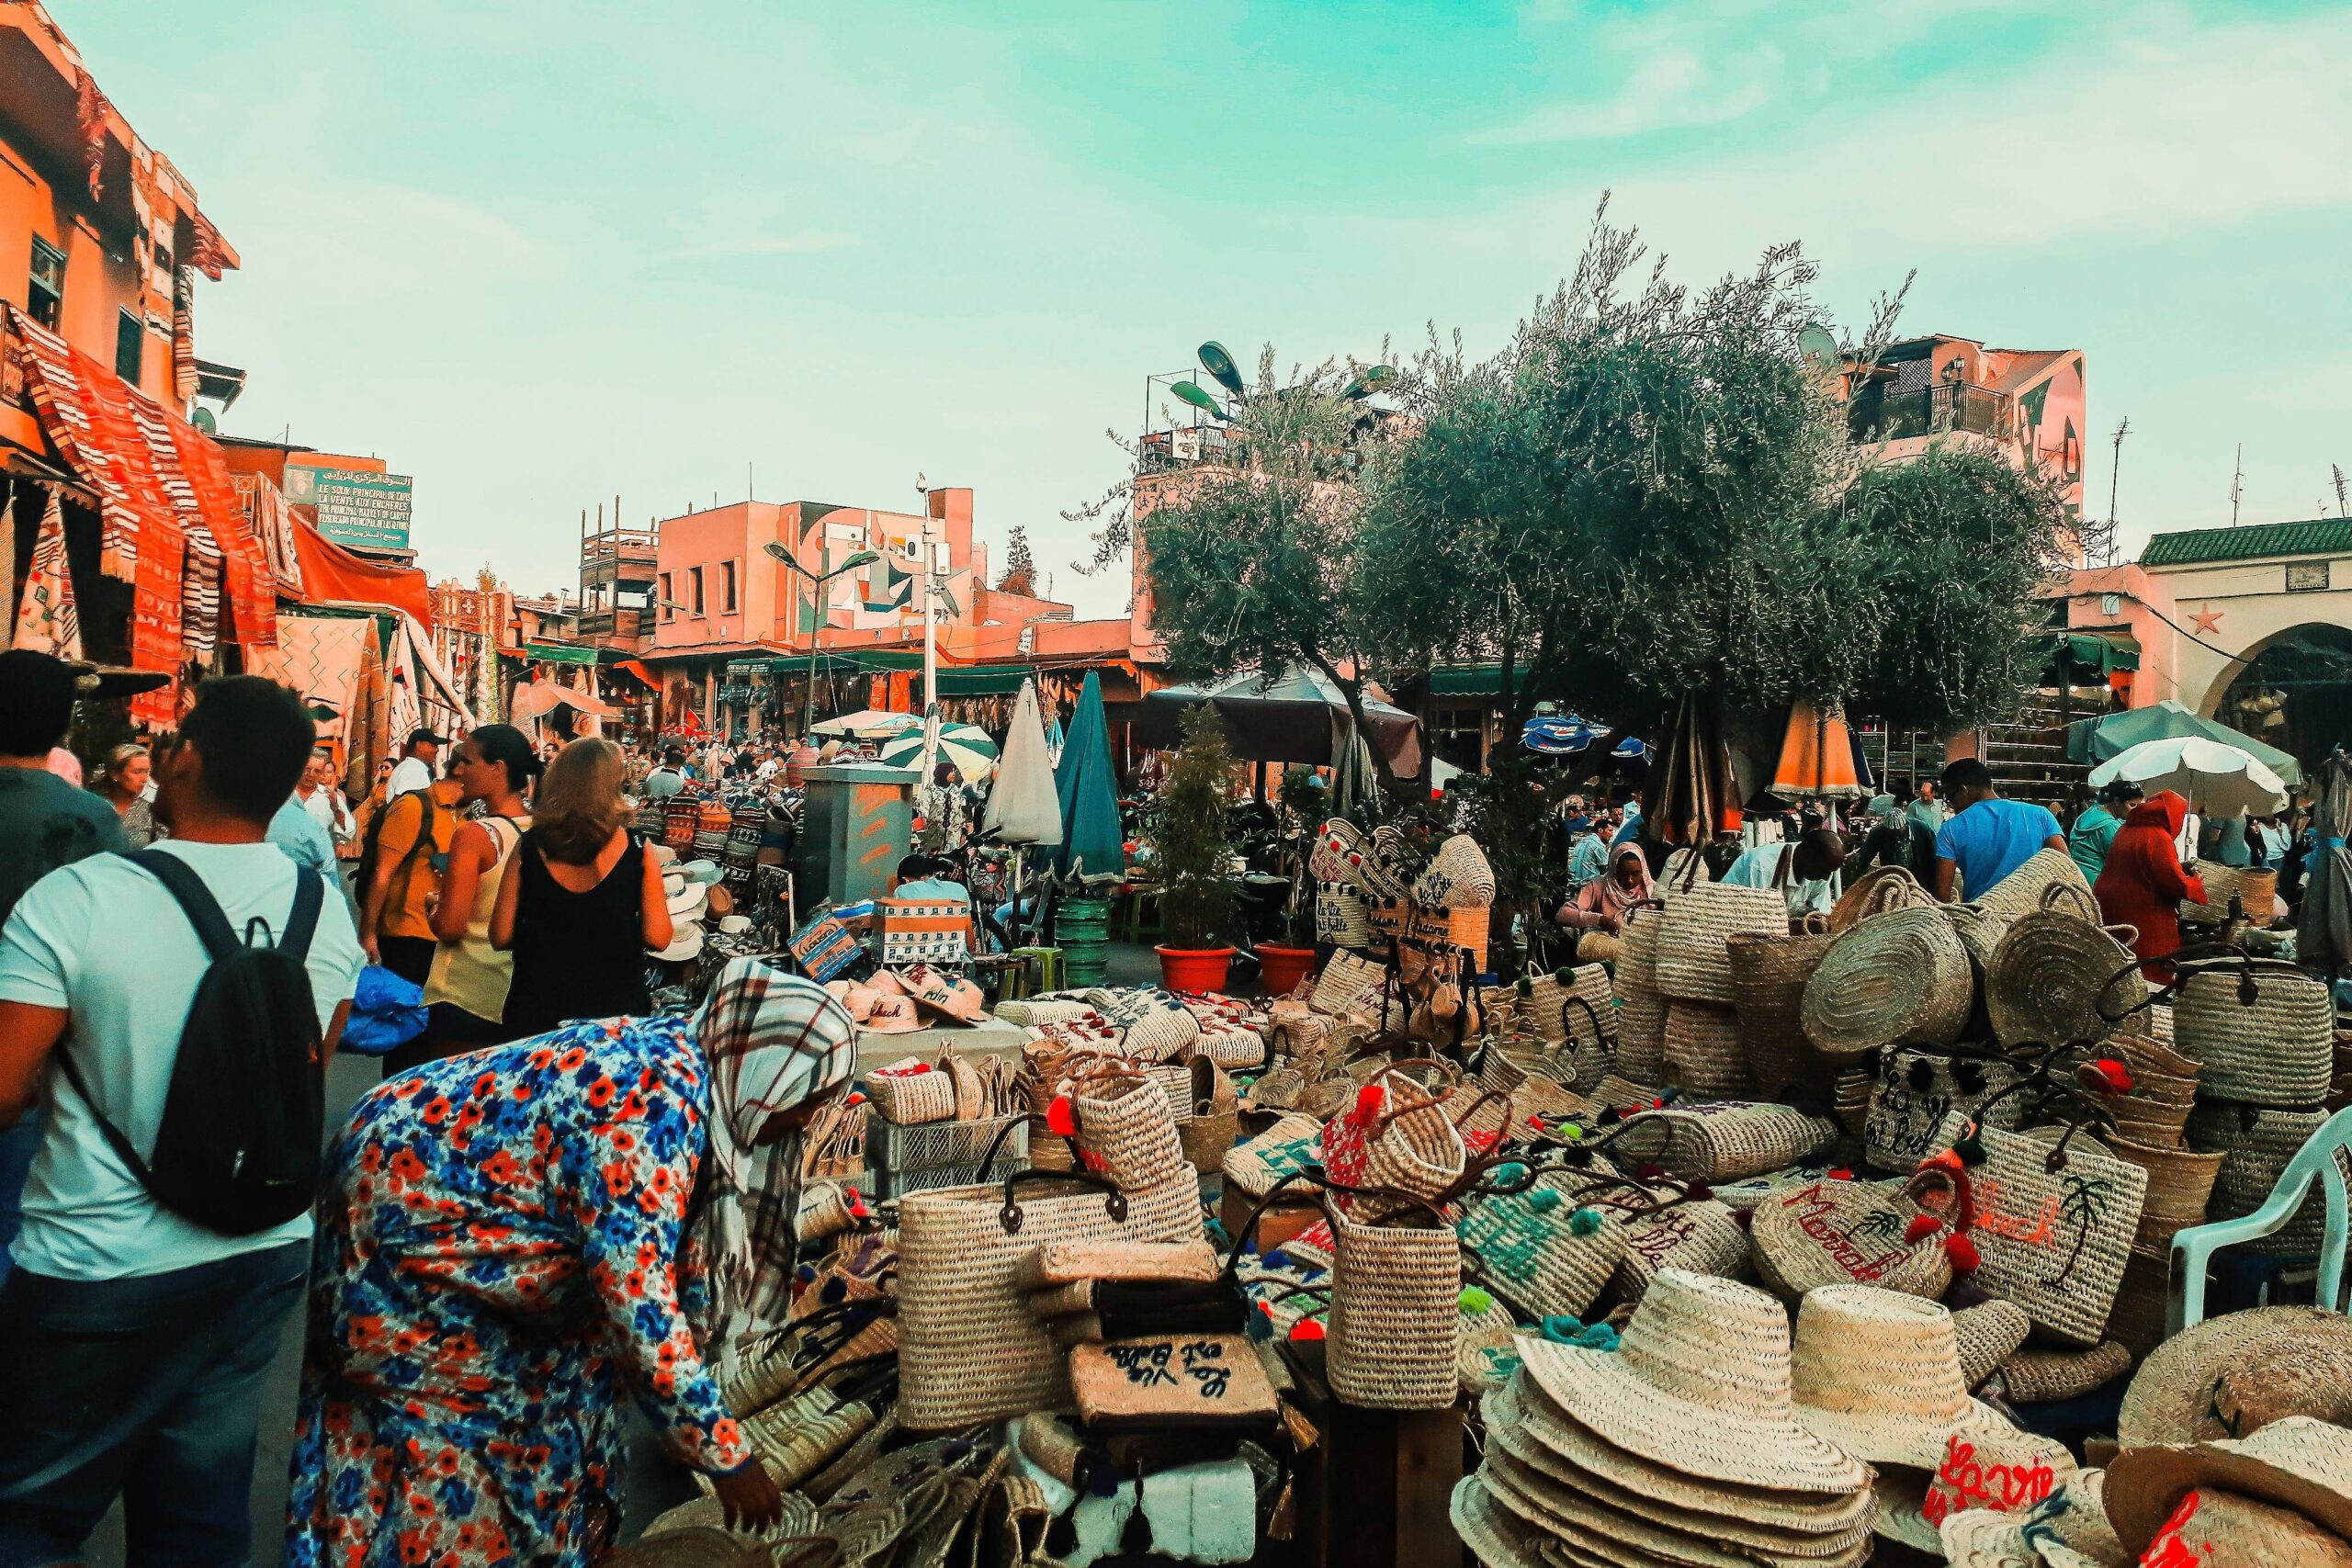 To direct tourists, a new tourism service in Marrakesh has been created